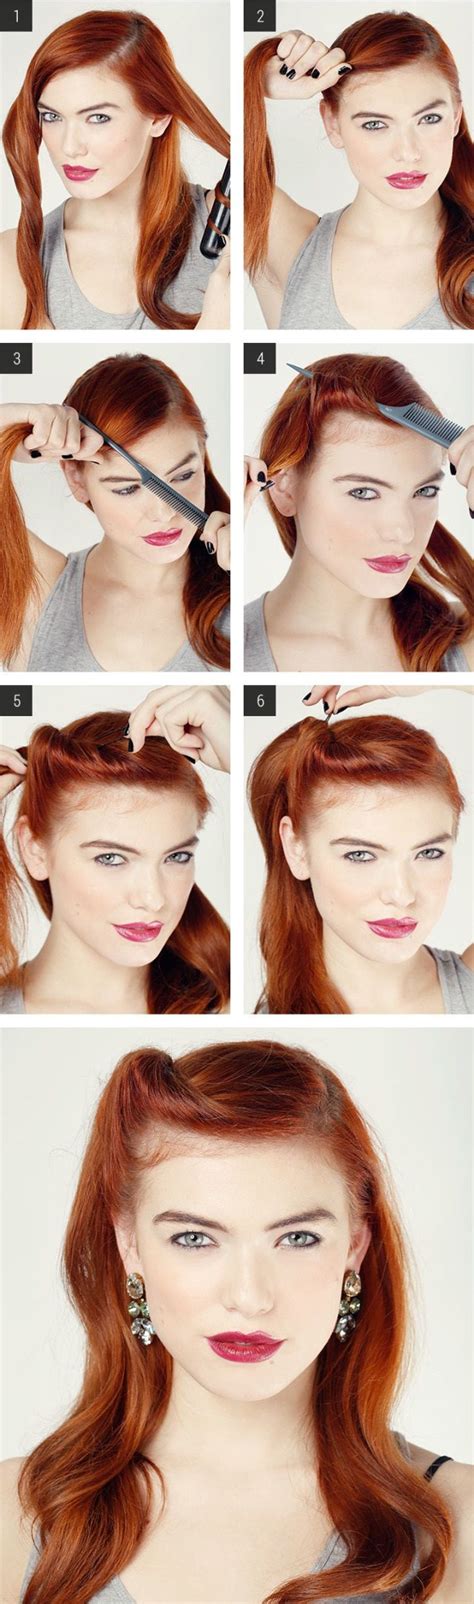 Spring Step By Step Hair Tutorials Every Girl Should See